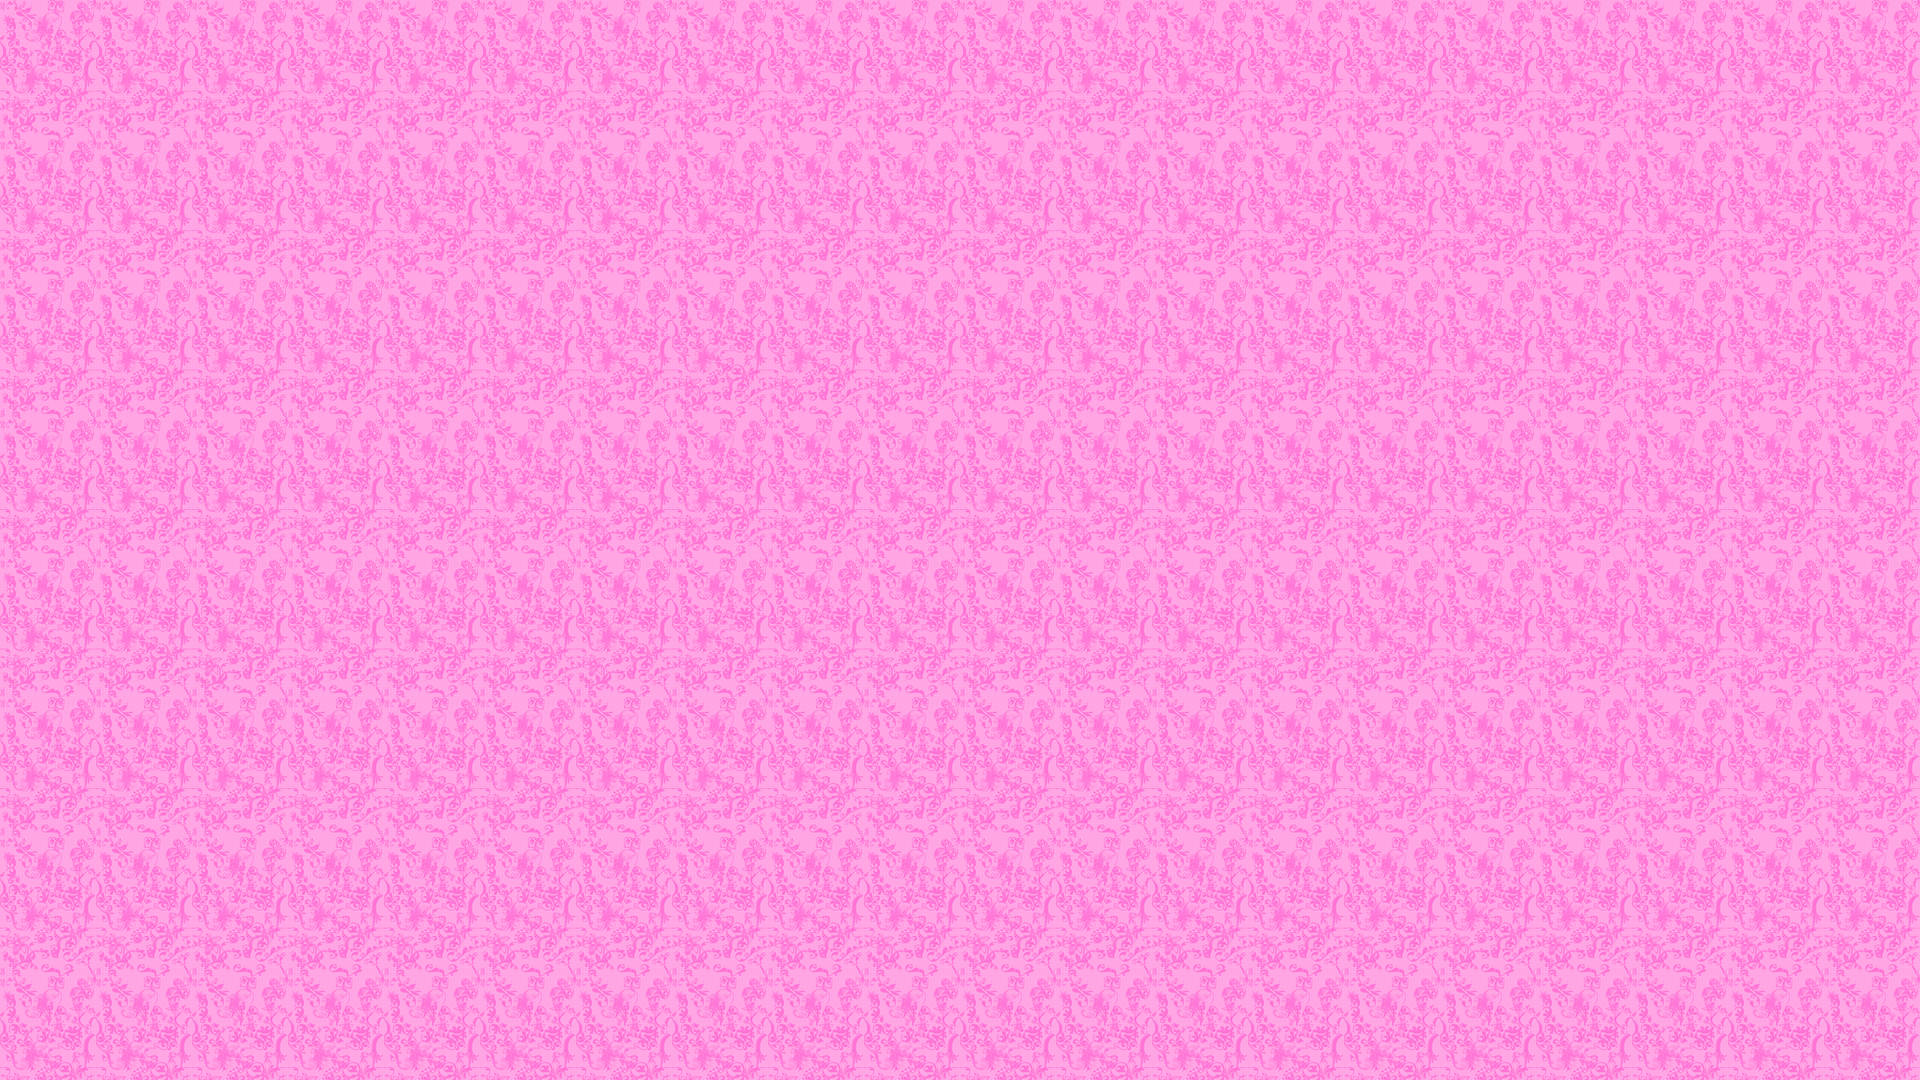 Hot Pink With Light Colored Patterns Background